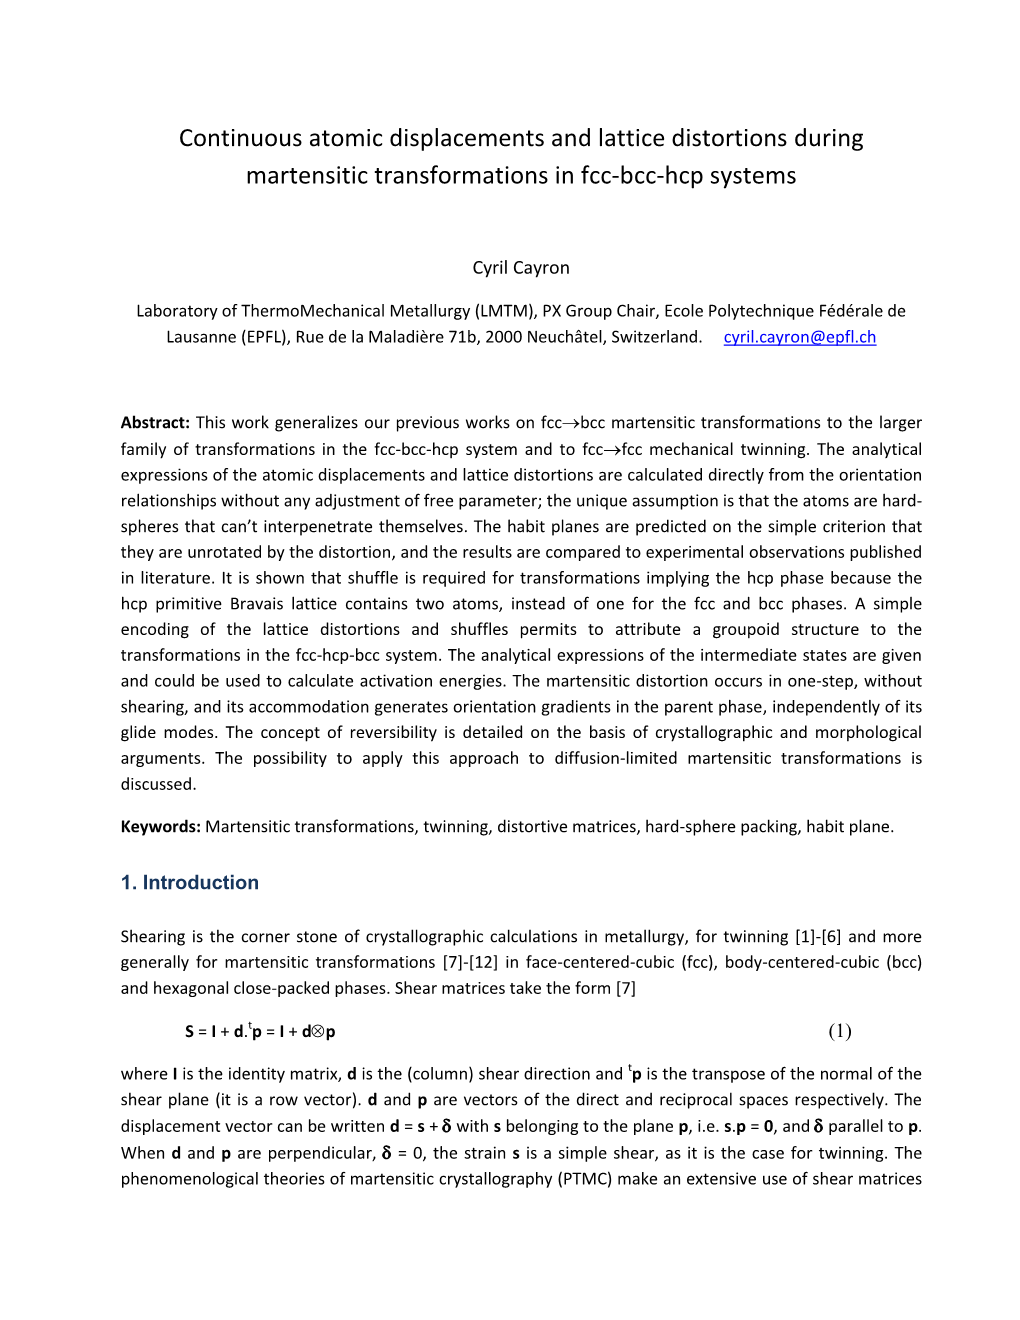 Continuous Atomic Displacements and Lattice Distortions During Martensitic Transformations in Fcc-Bcc-Hcp Systems